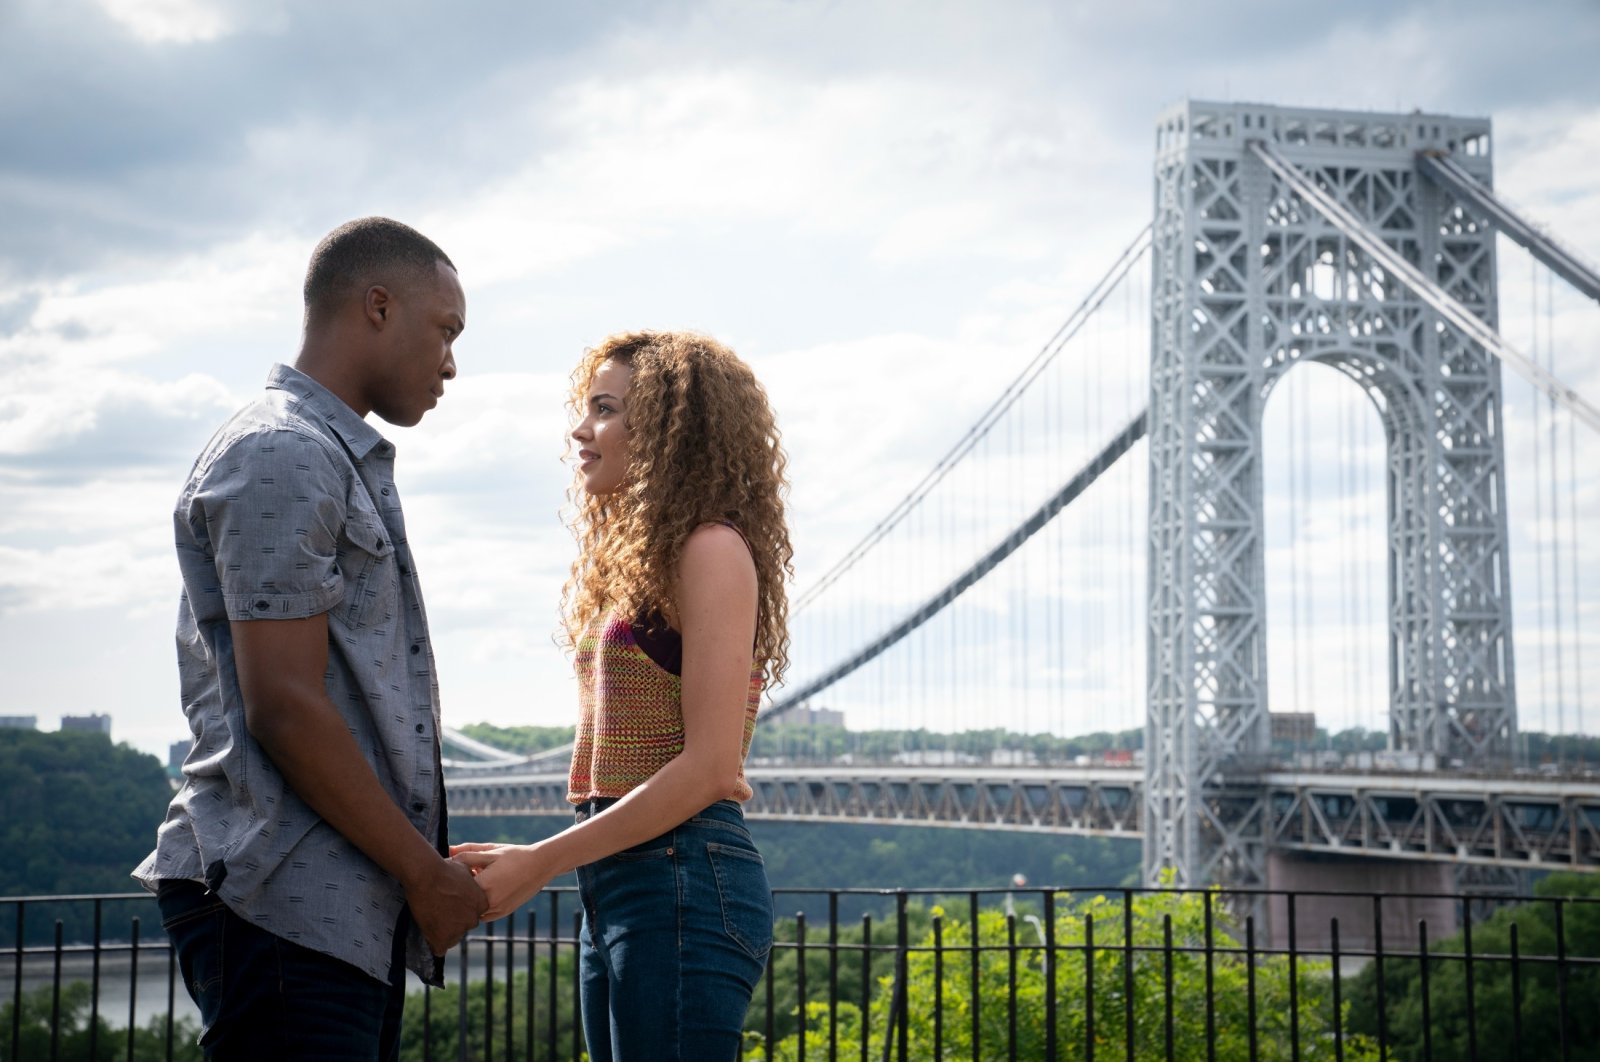 Corey Hawkins (L) and Leslie Grace hold hands in a scene from the musical film "In the Heights." (Warner Bros. via AP)